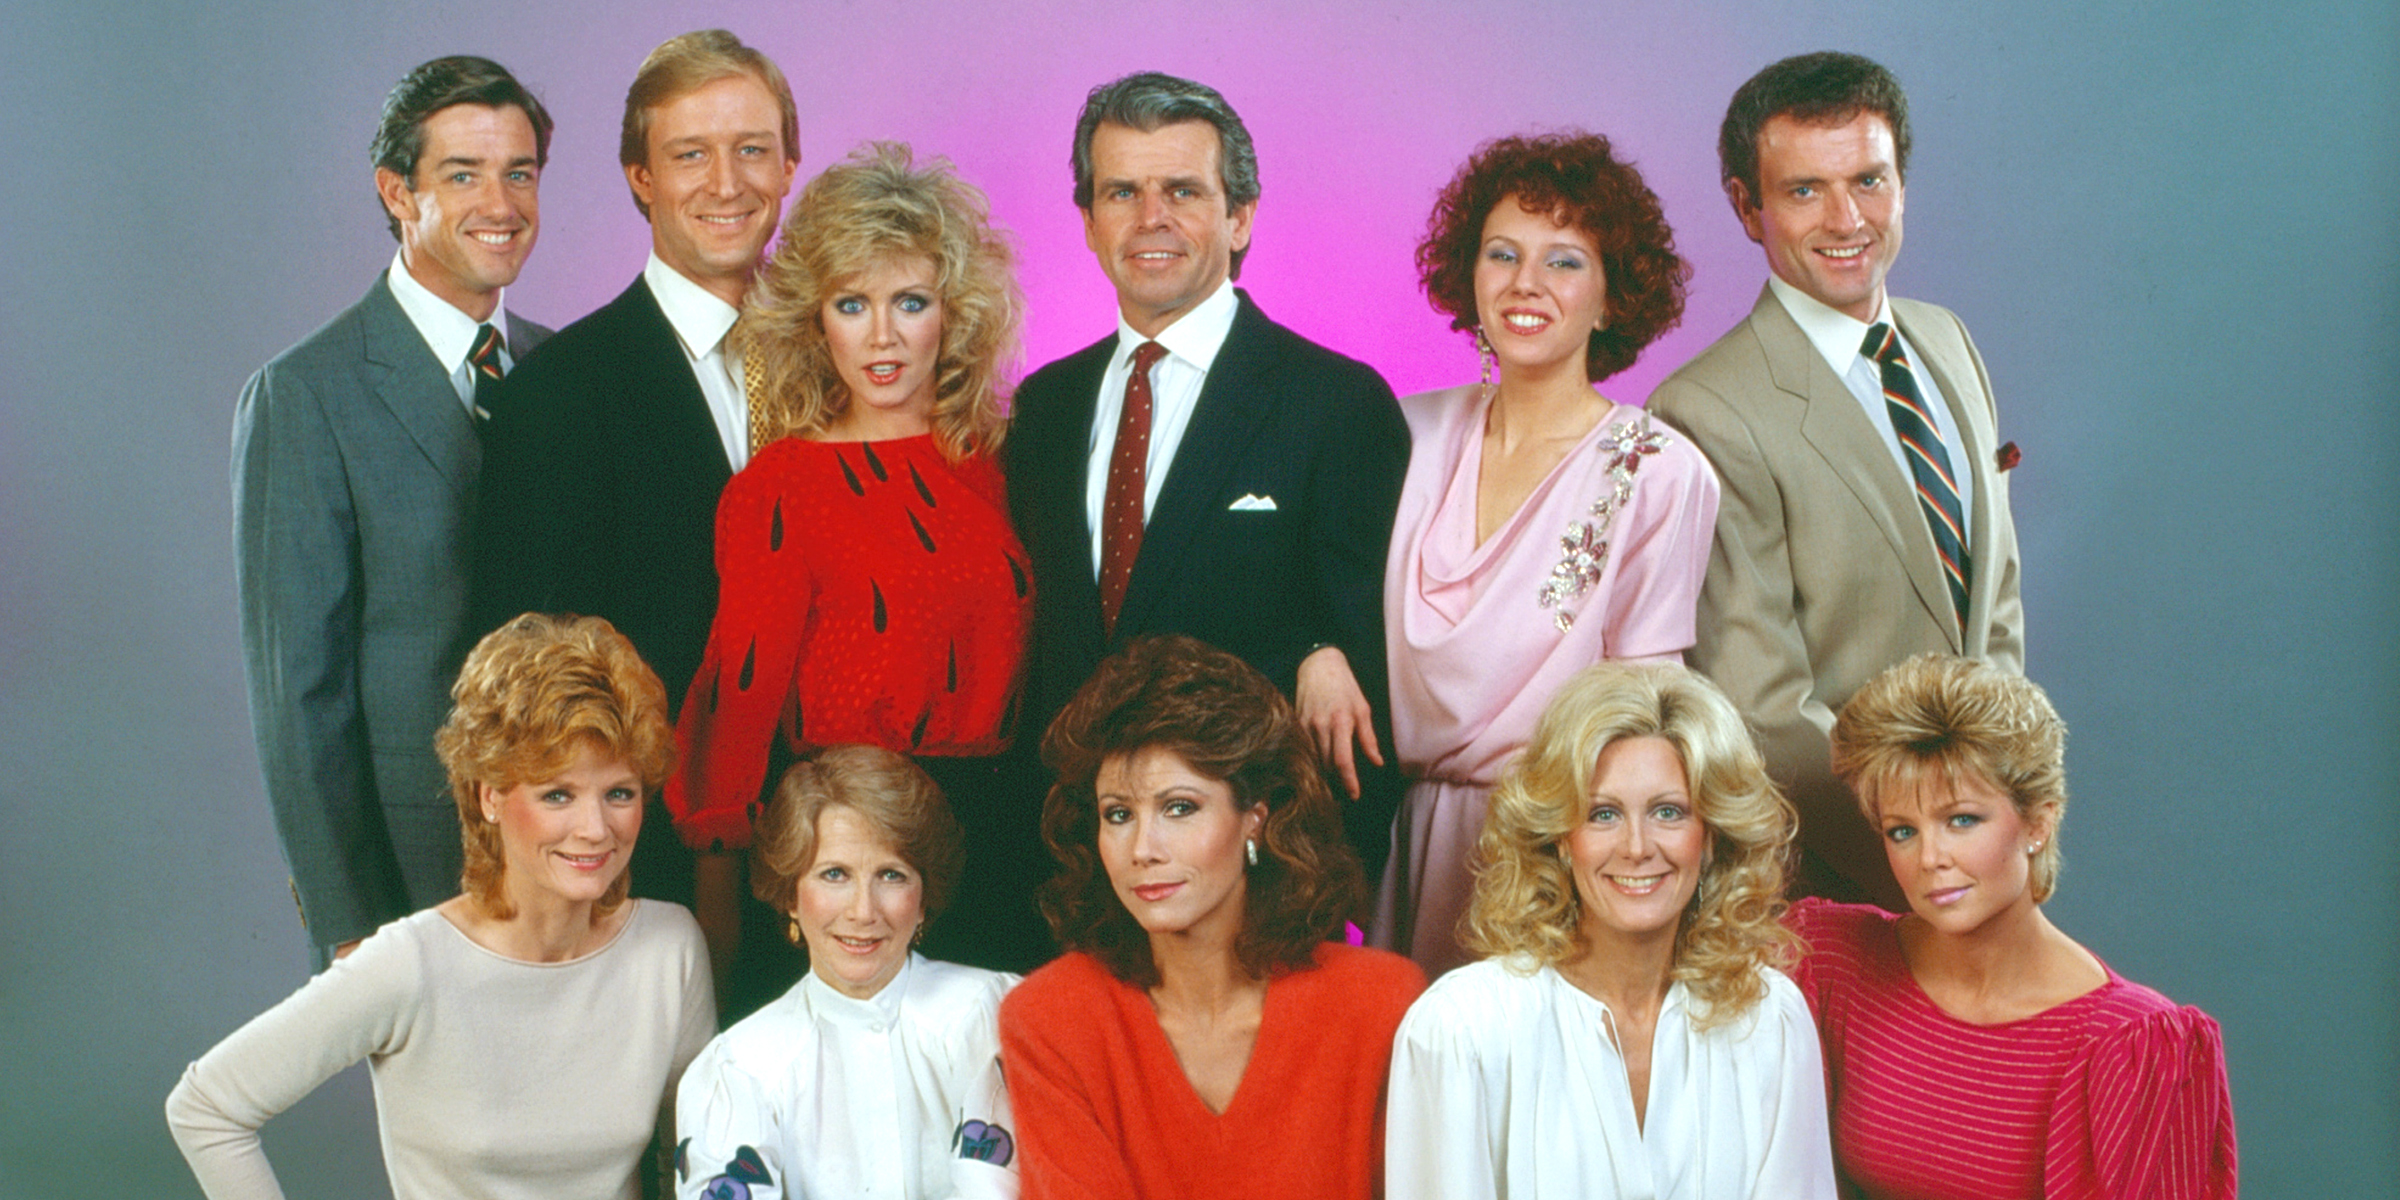 Casts of "Knots Landing" | Source: Getty Images